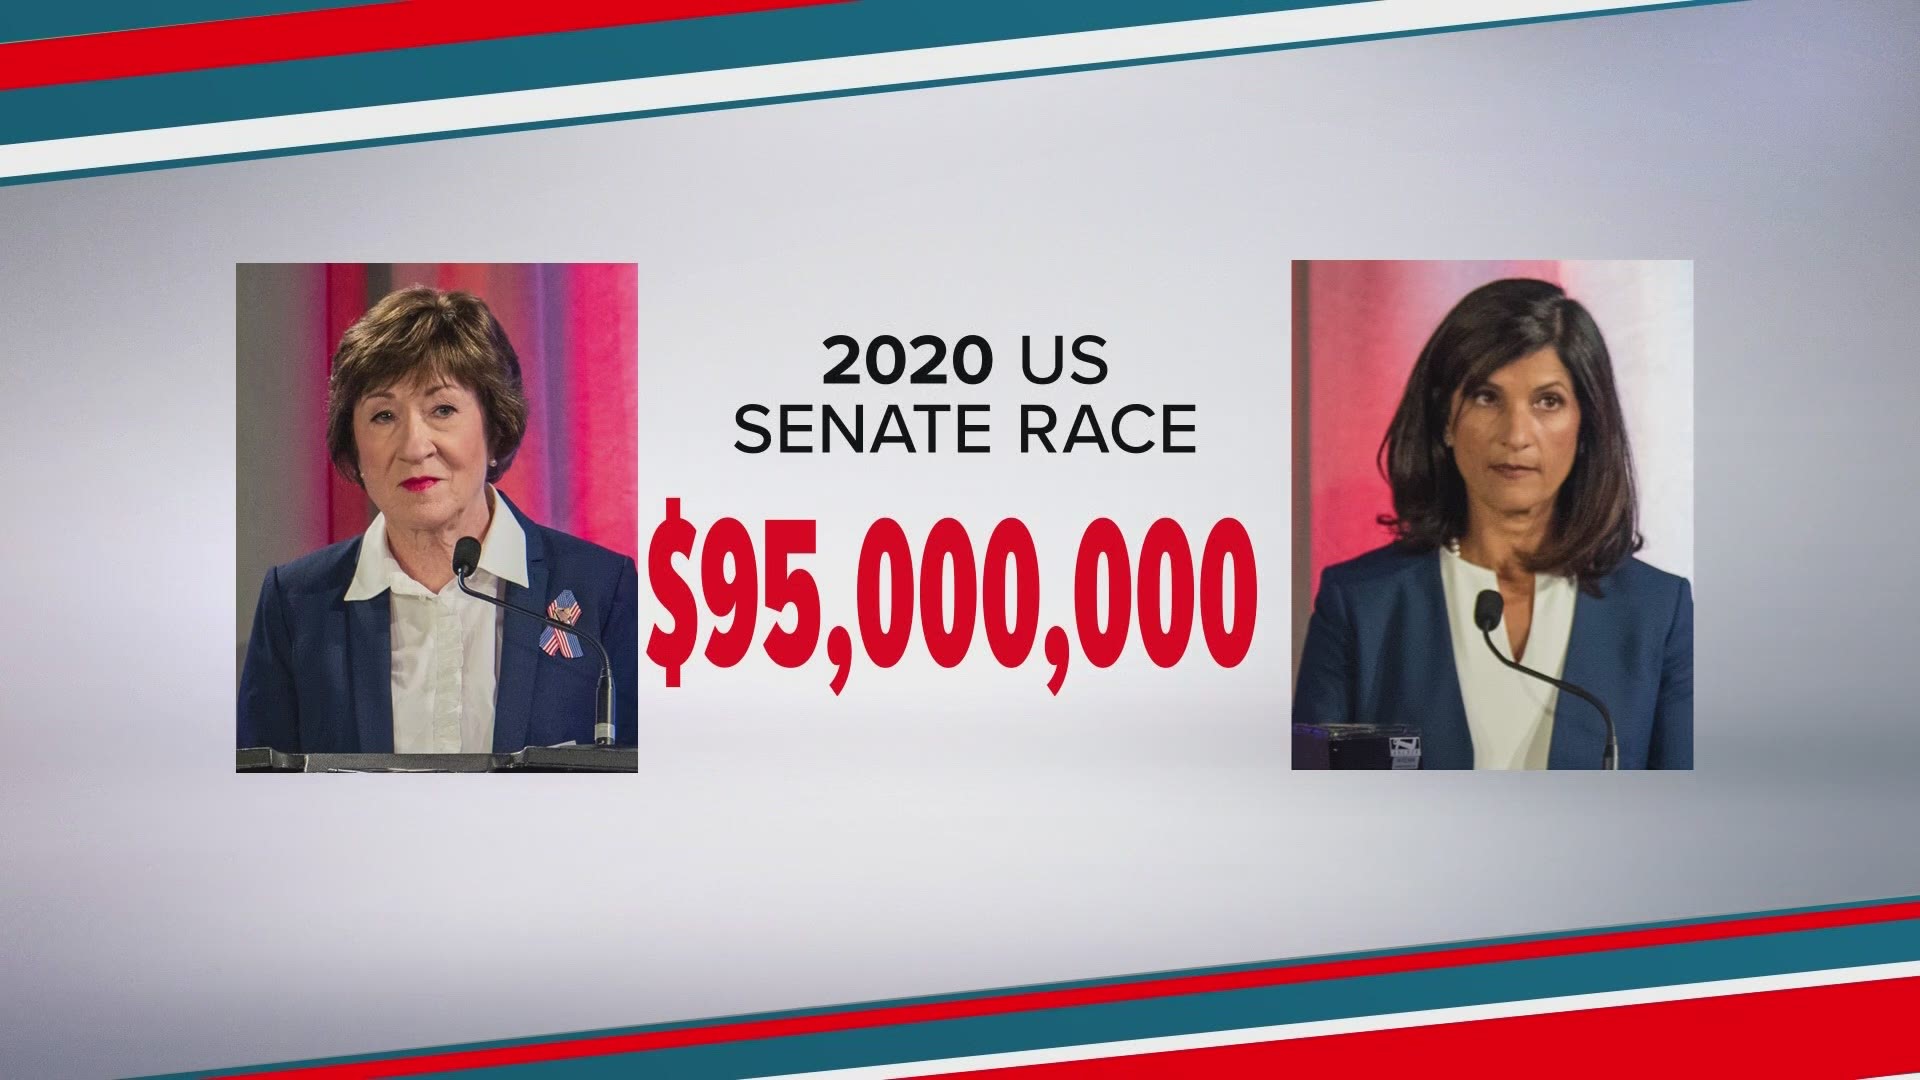 Susan Collins and Sara Gideon are expected to raise more than $100 million in Senate race